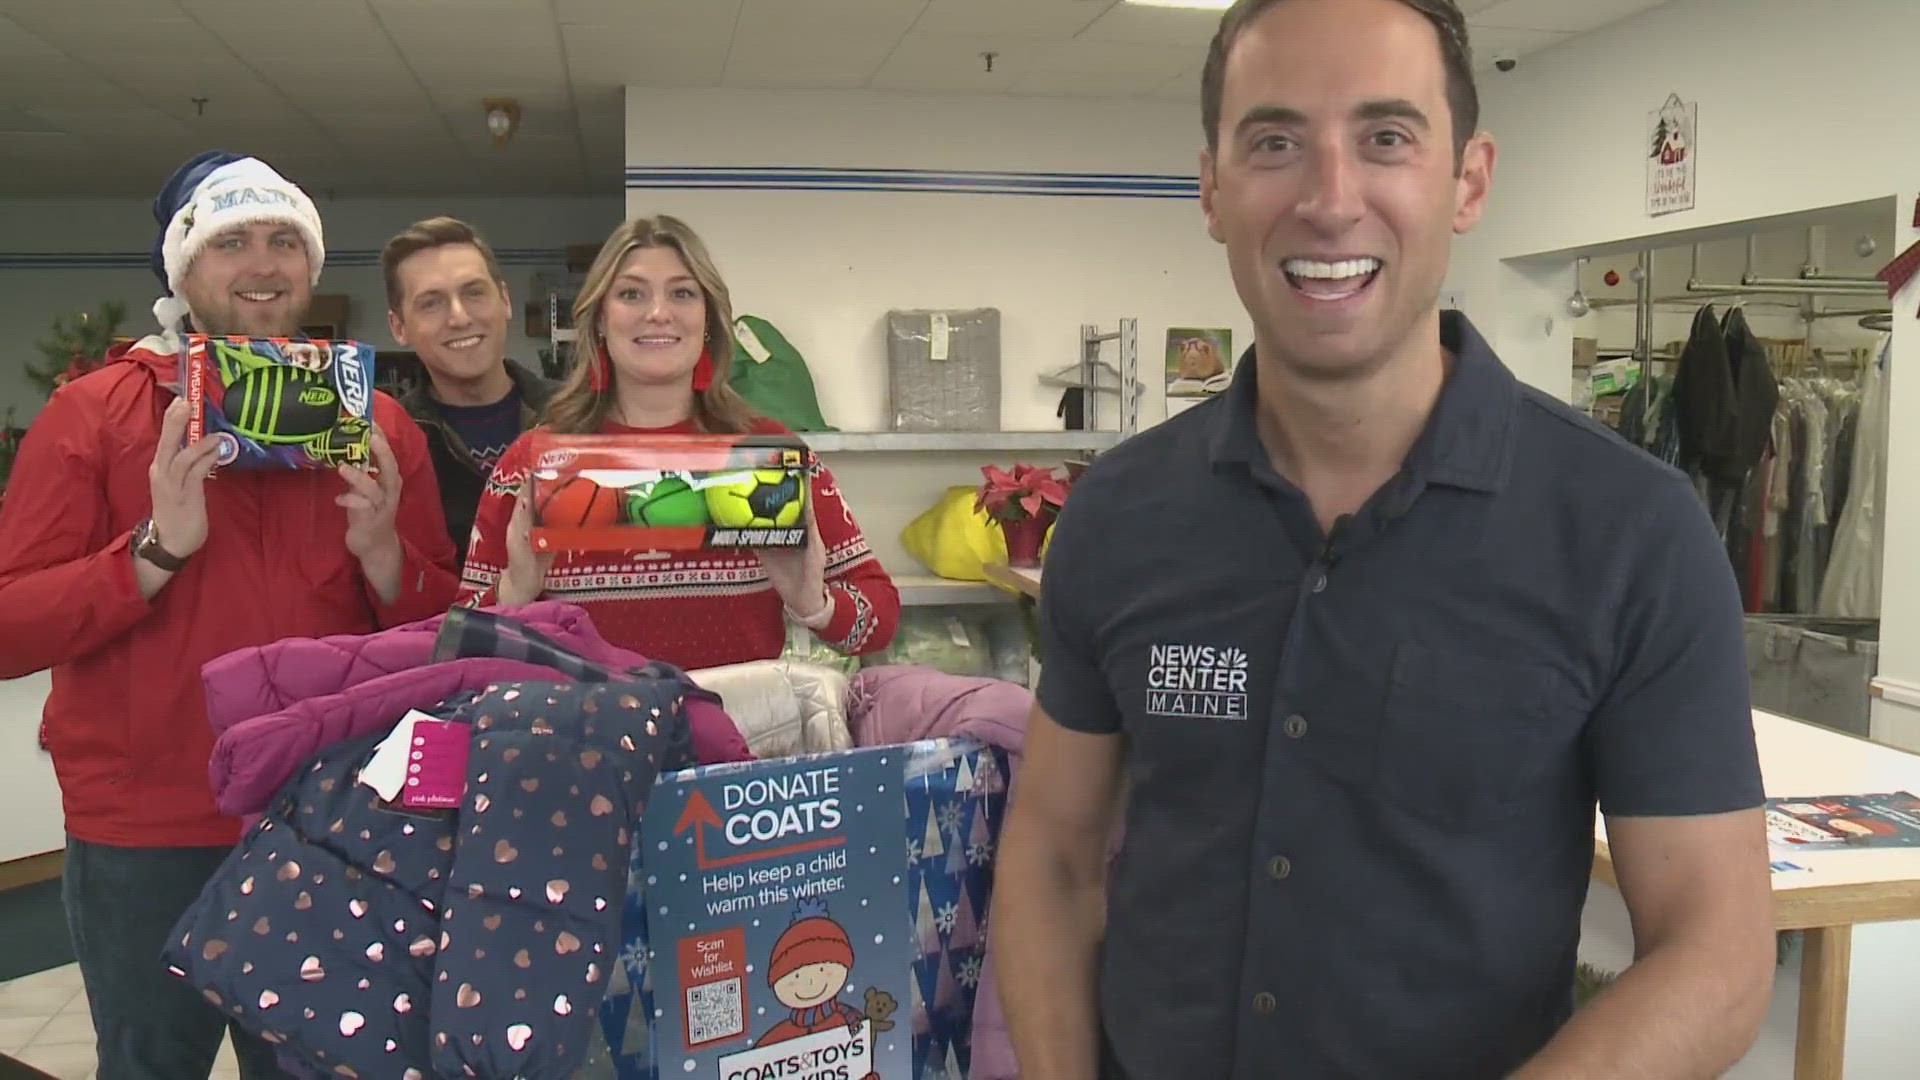 NEWS CENTER Maine crews had fun around the state on Saturday, collecting coats and toys for children in need.